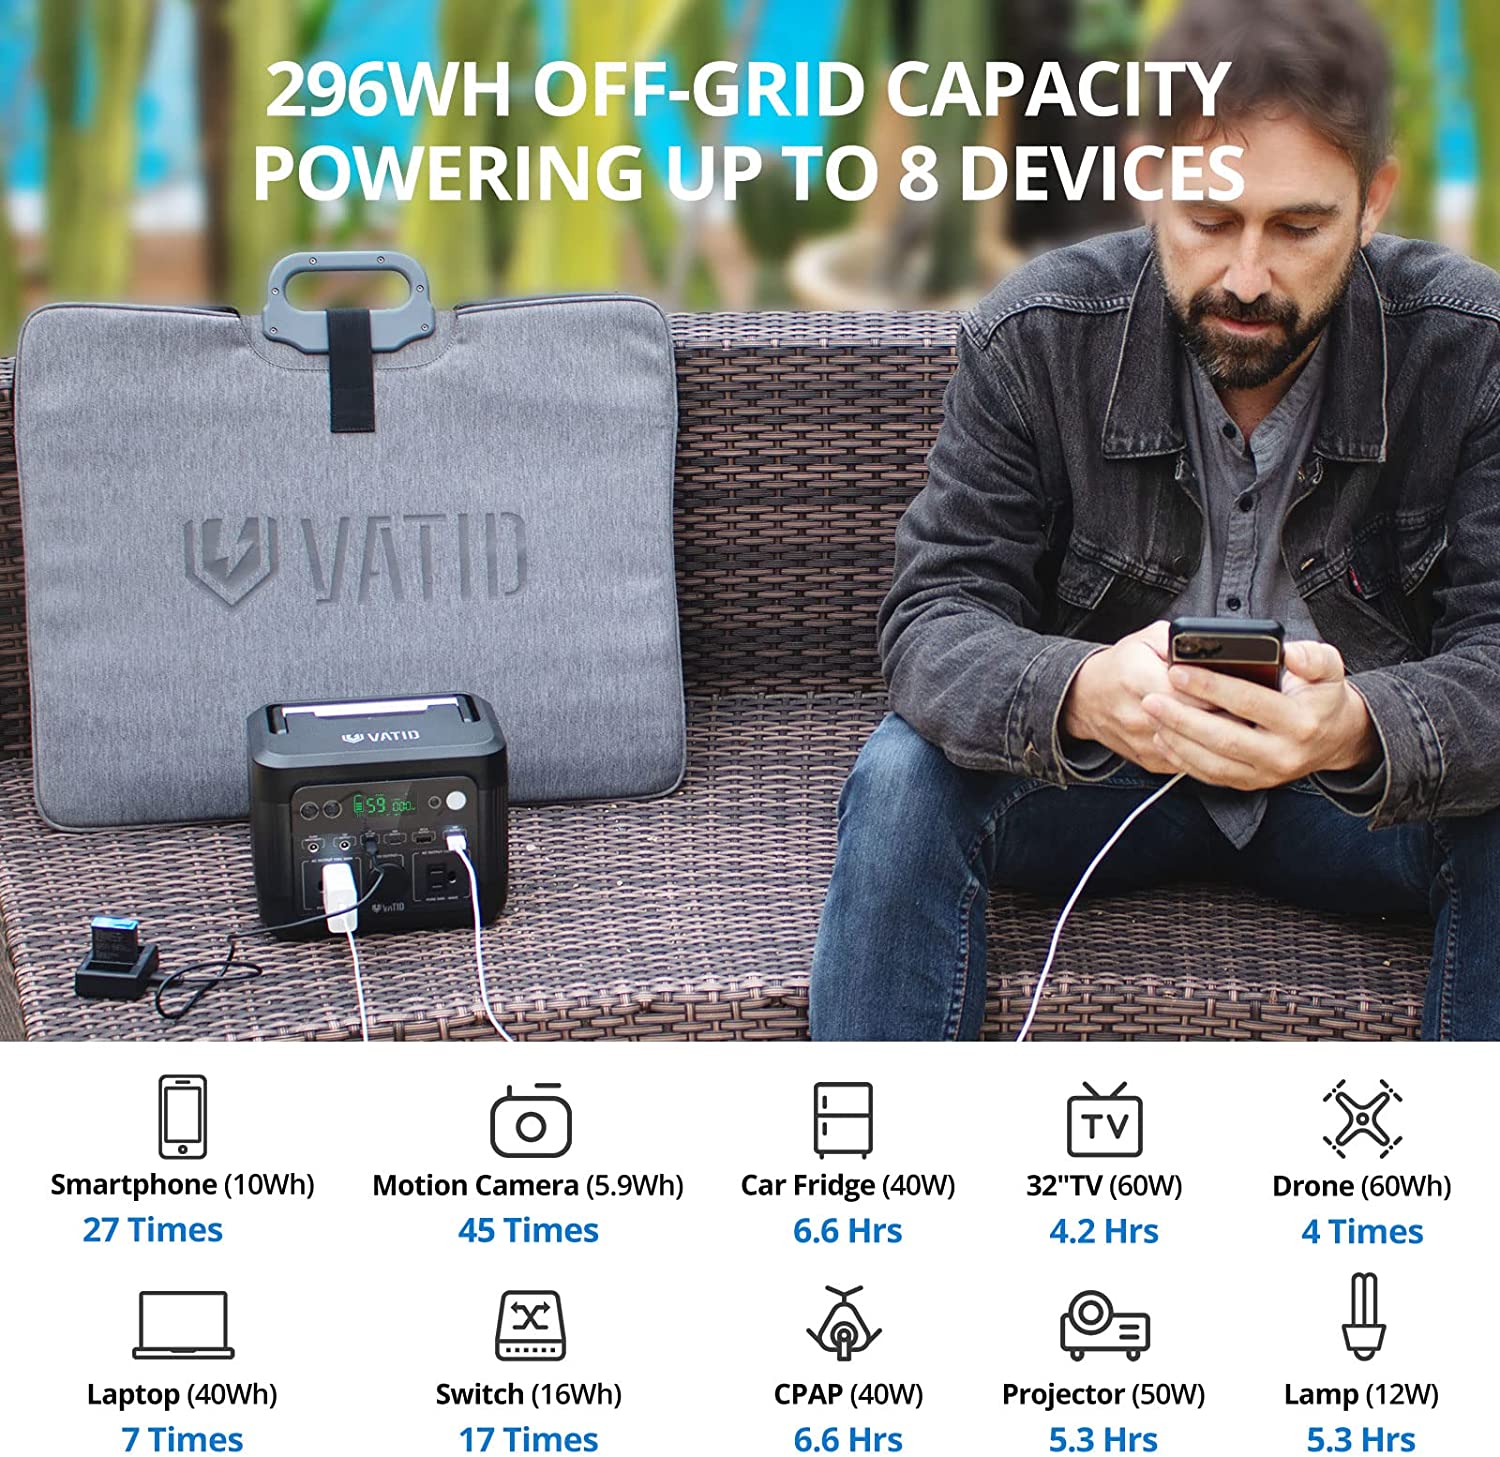 VATID Portable Power Generator,300W 296Wh,2.8hrs 100% Recharge